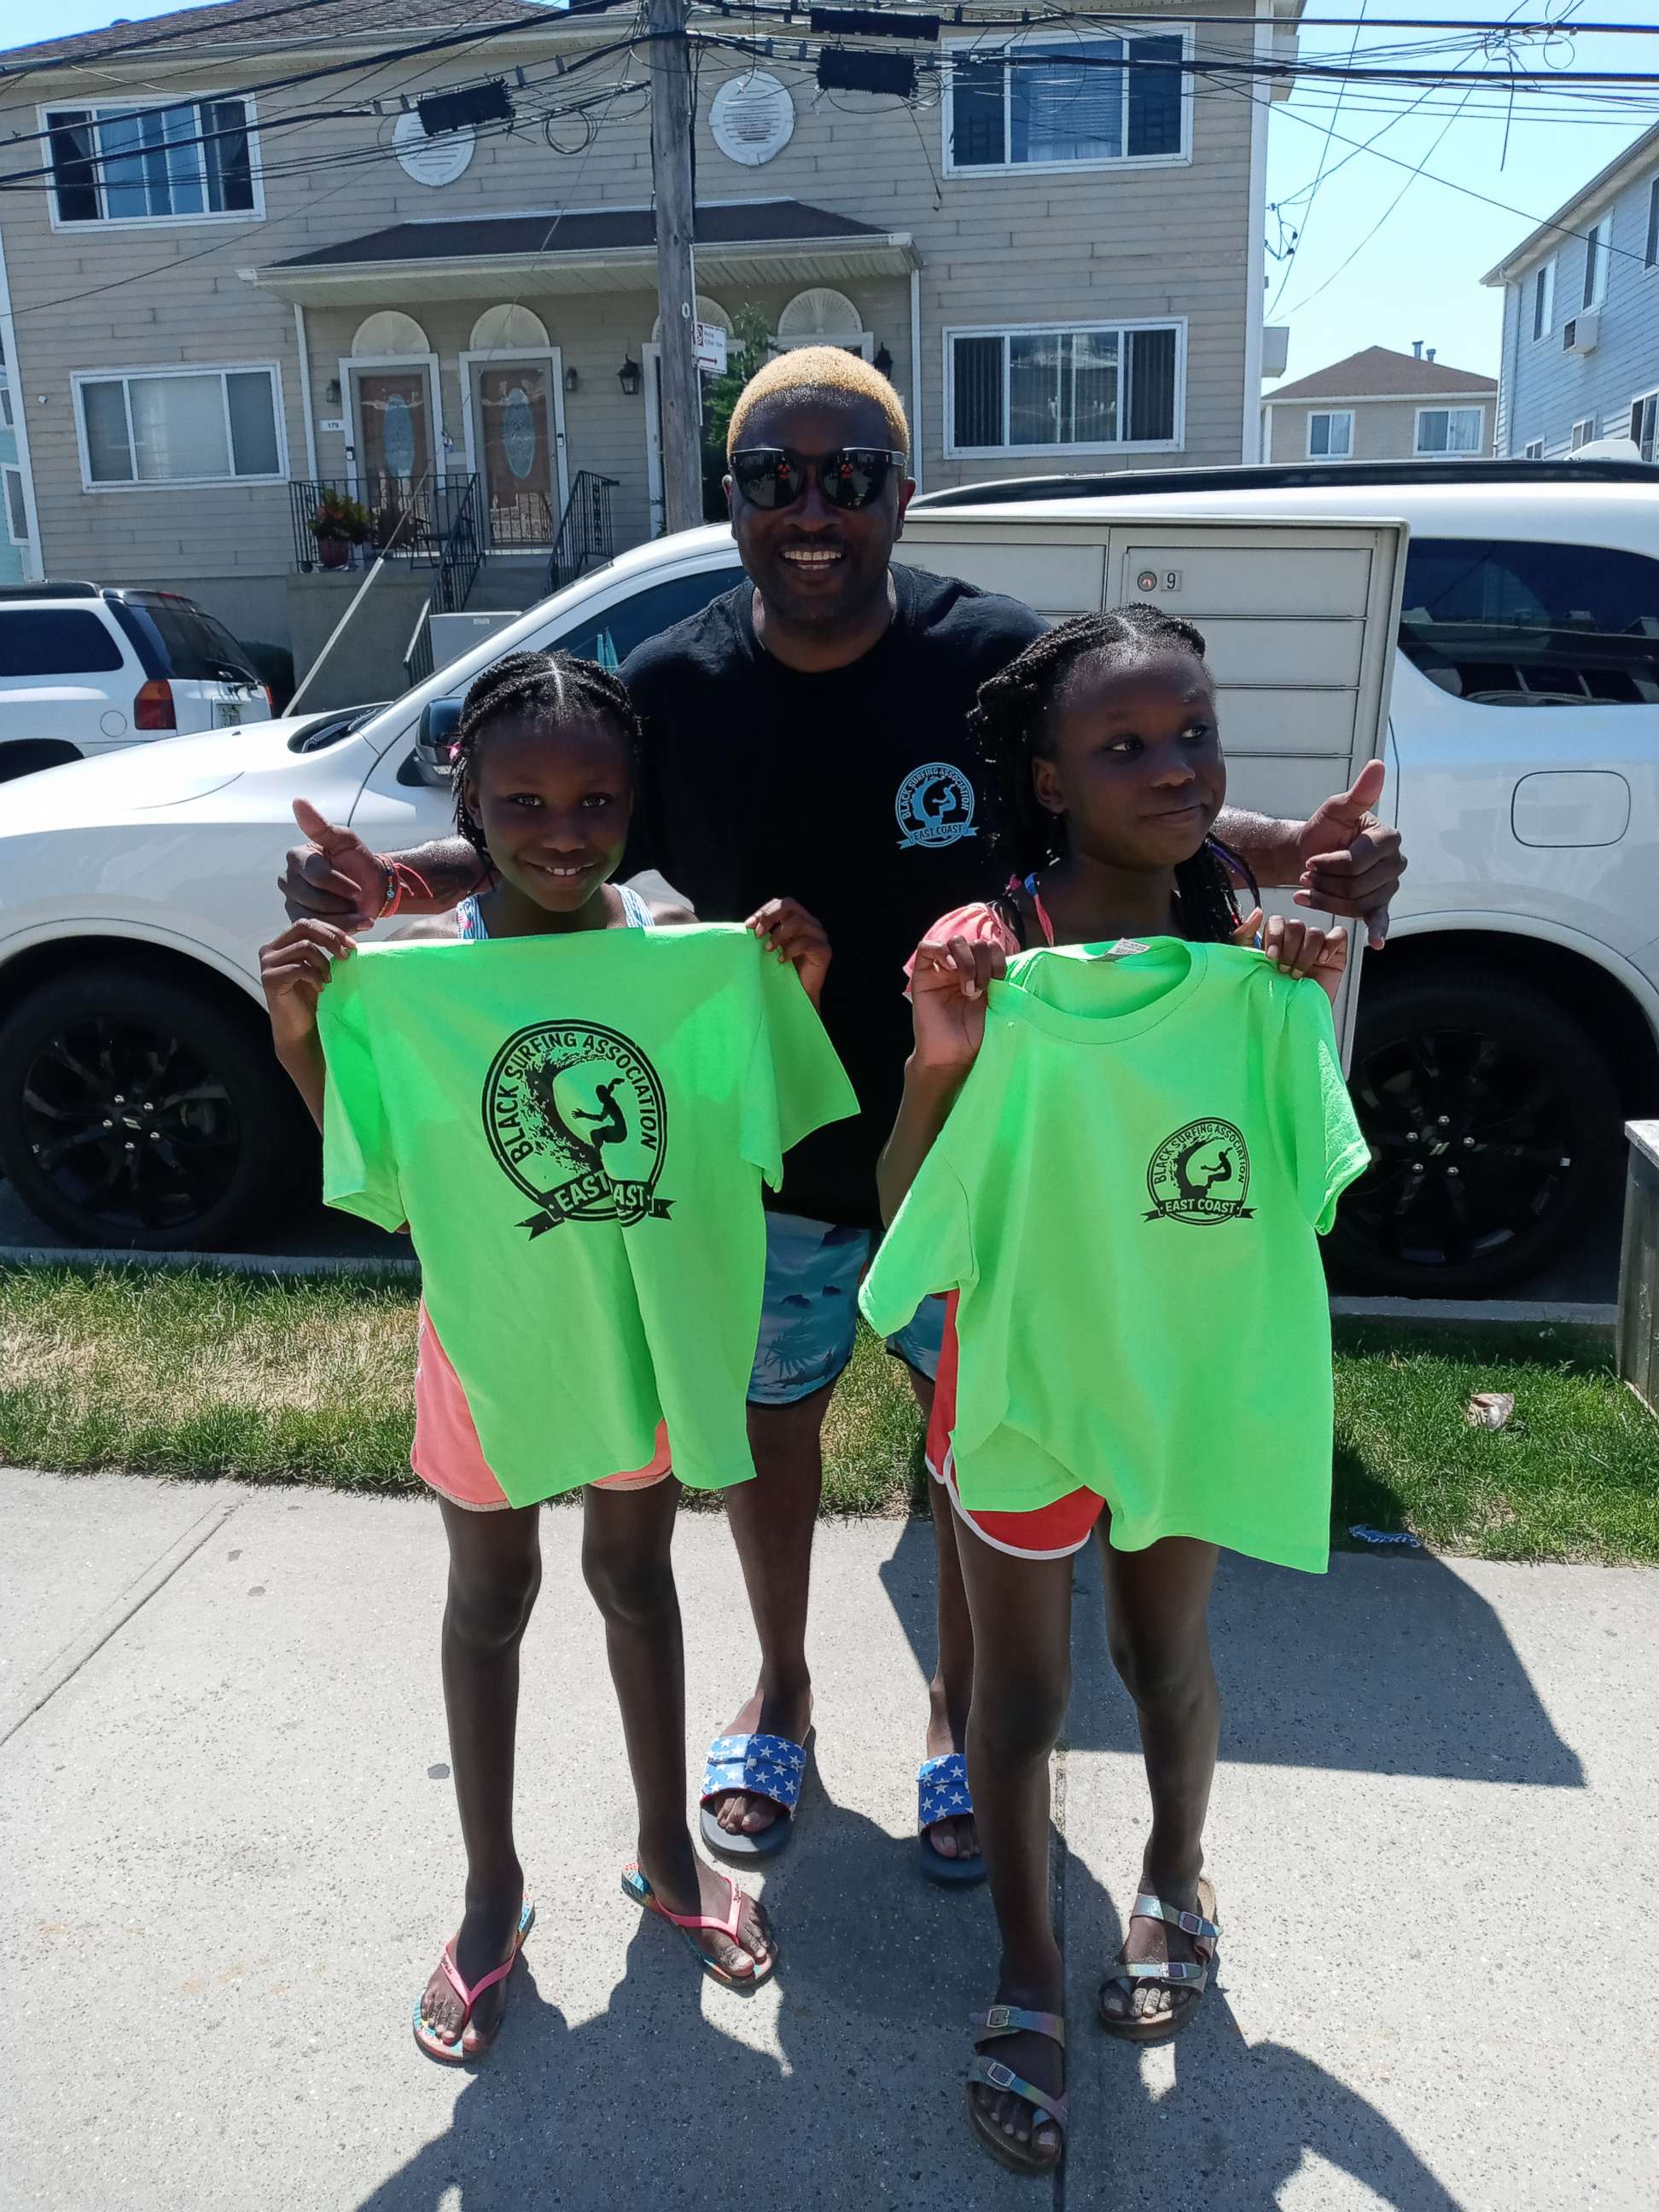 PHOTO: Lou Harris, the founder of the East Coast chapter of the Black Surfing Association, poses for a photo with twins Nyla and Soleil Landau. Harris provides free surfing lessons to youths in New York's Rockaways.